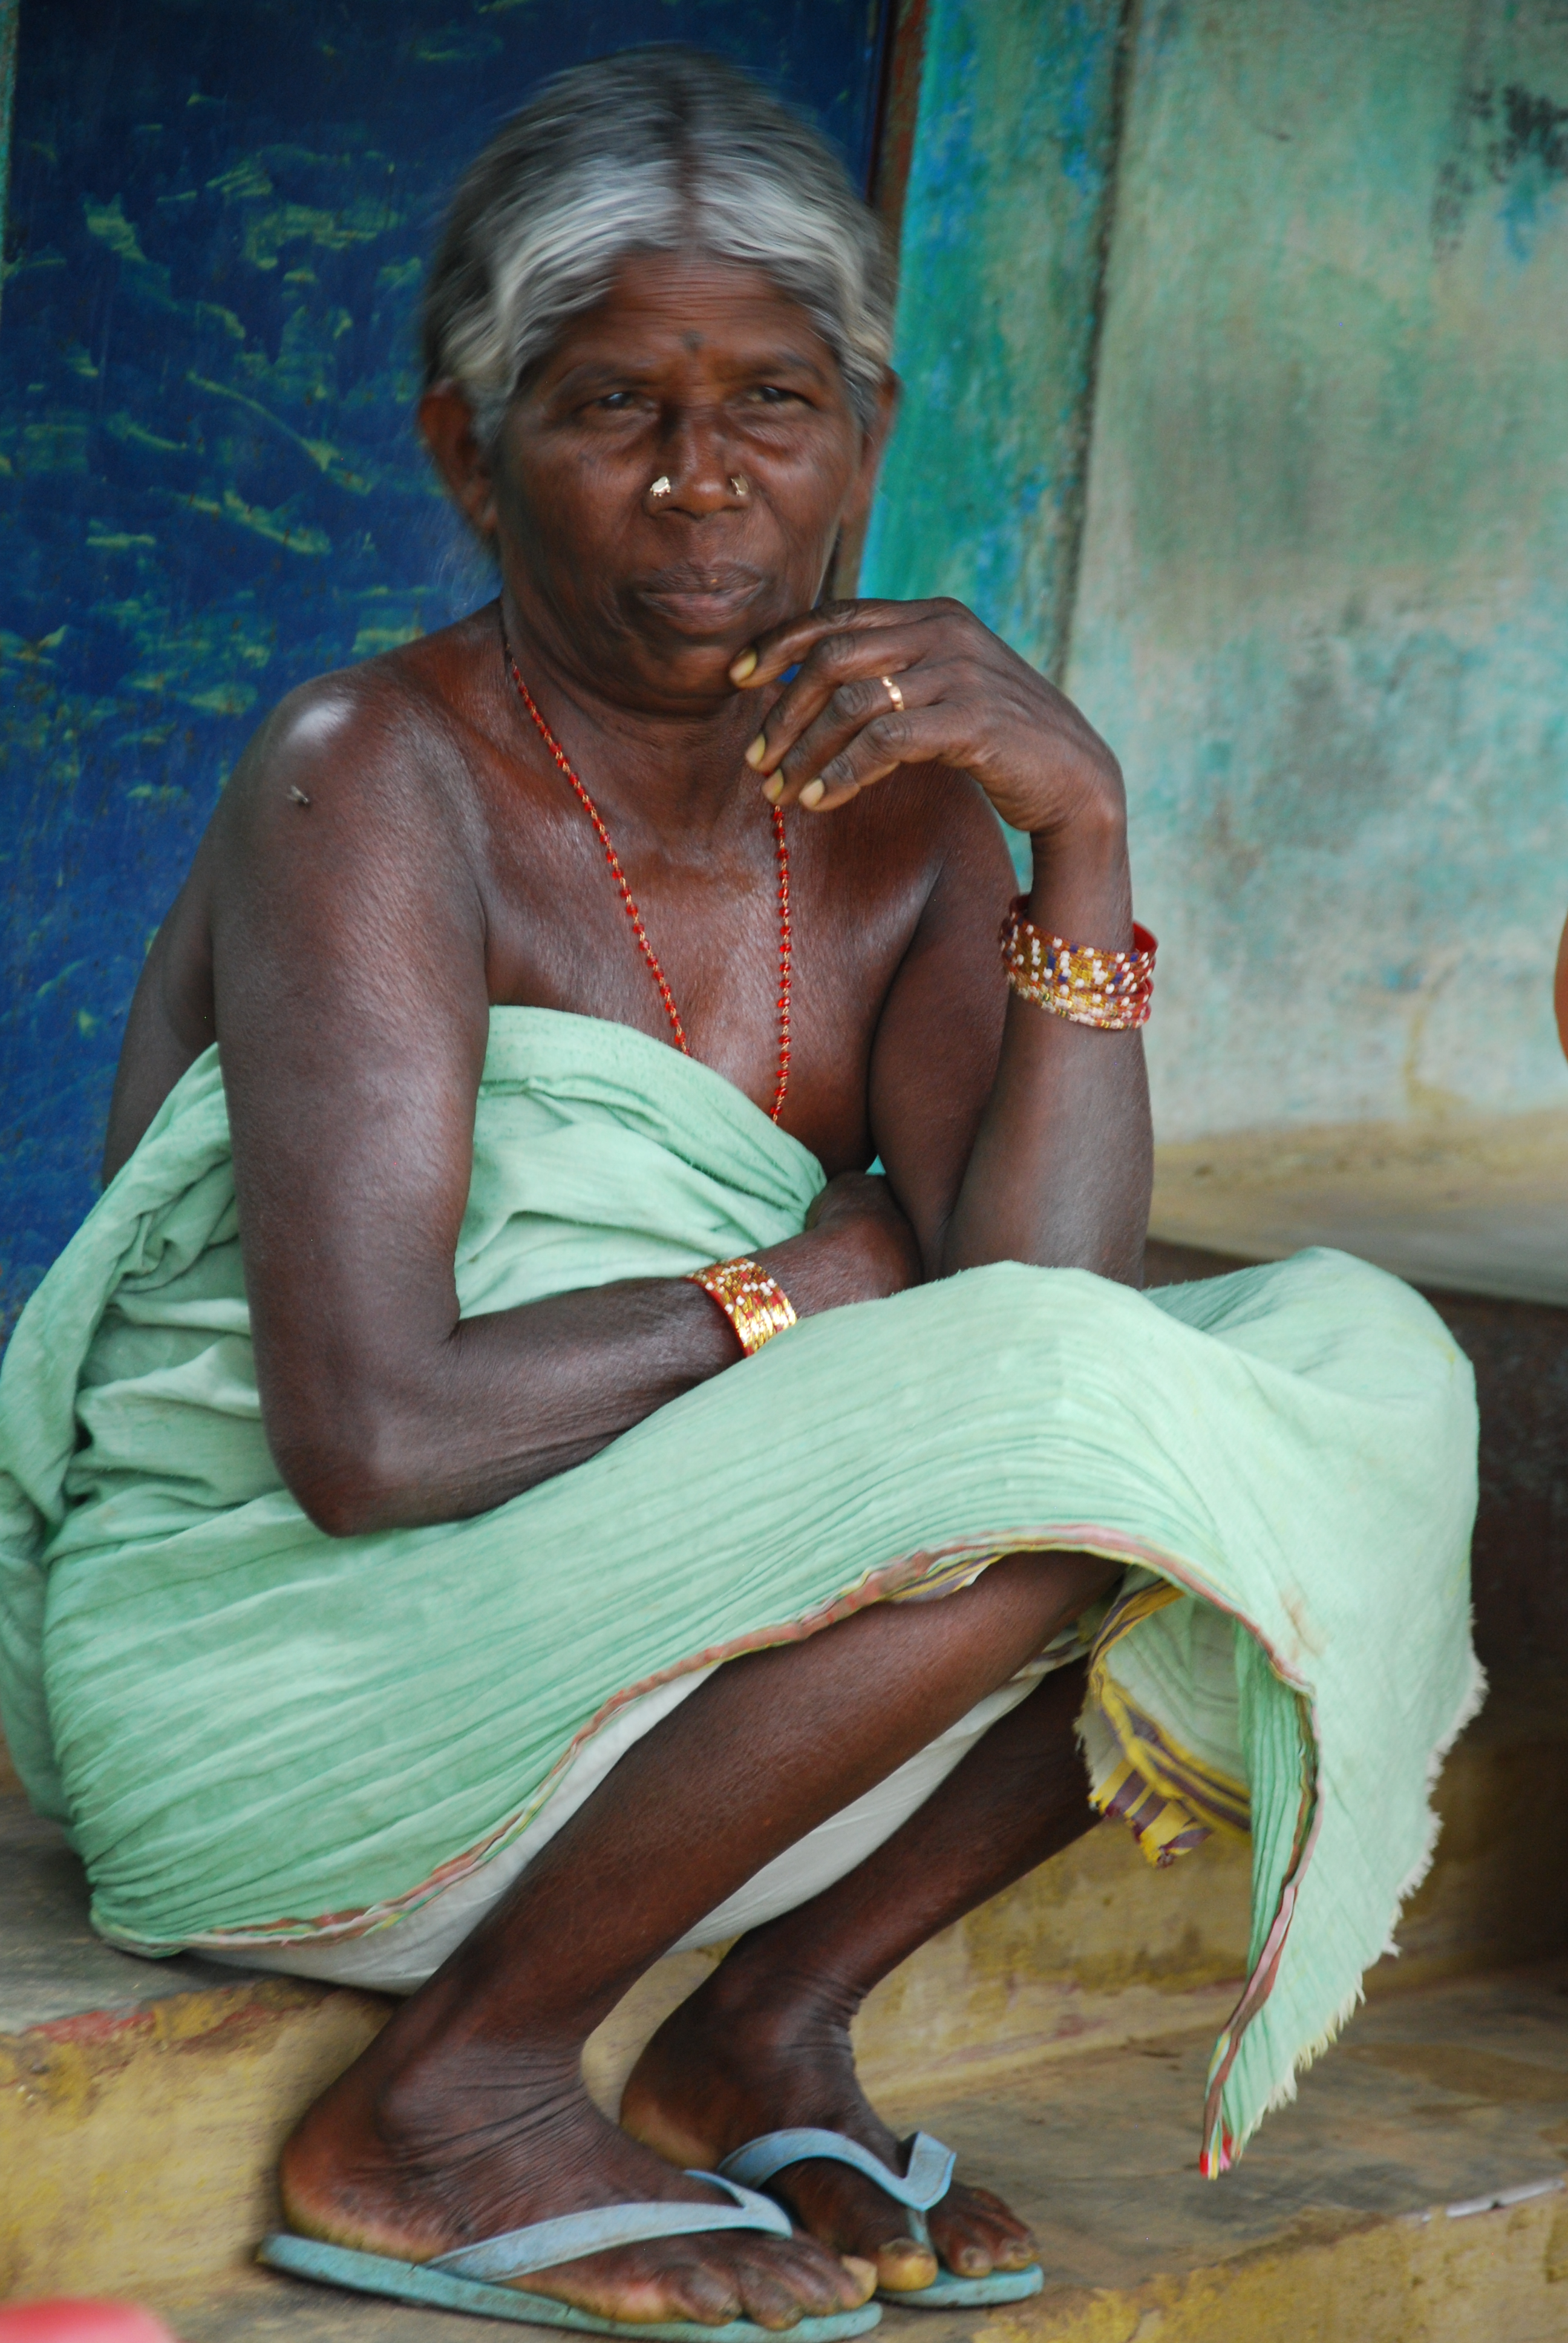 The beauty of old tribal women – Go India, go future!